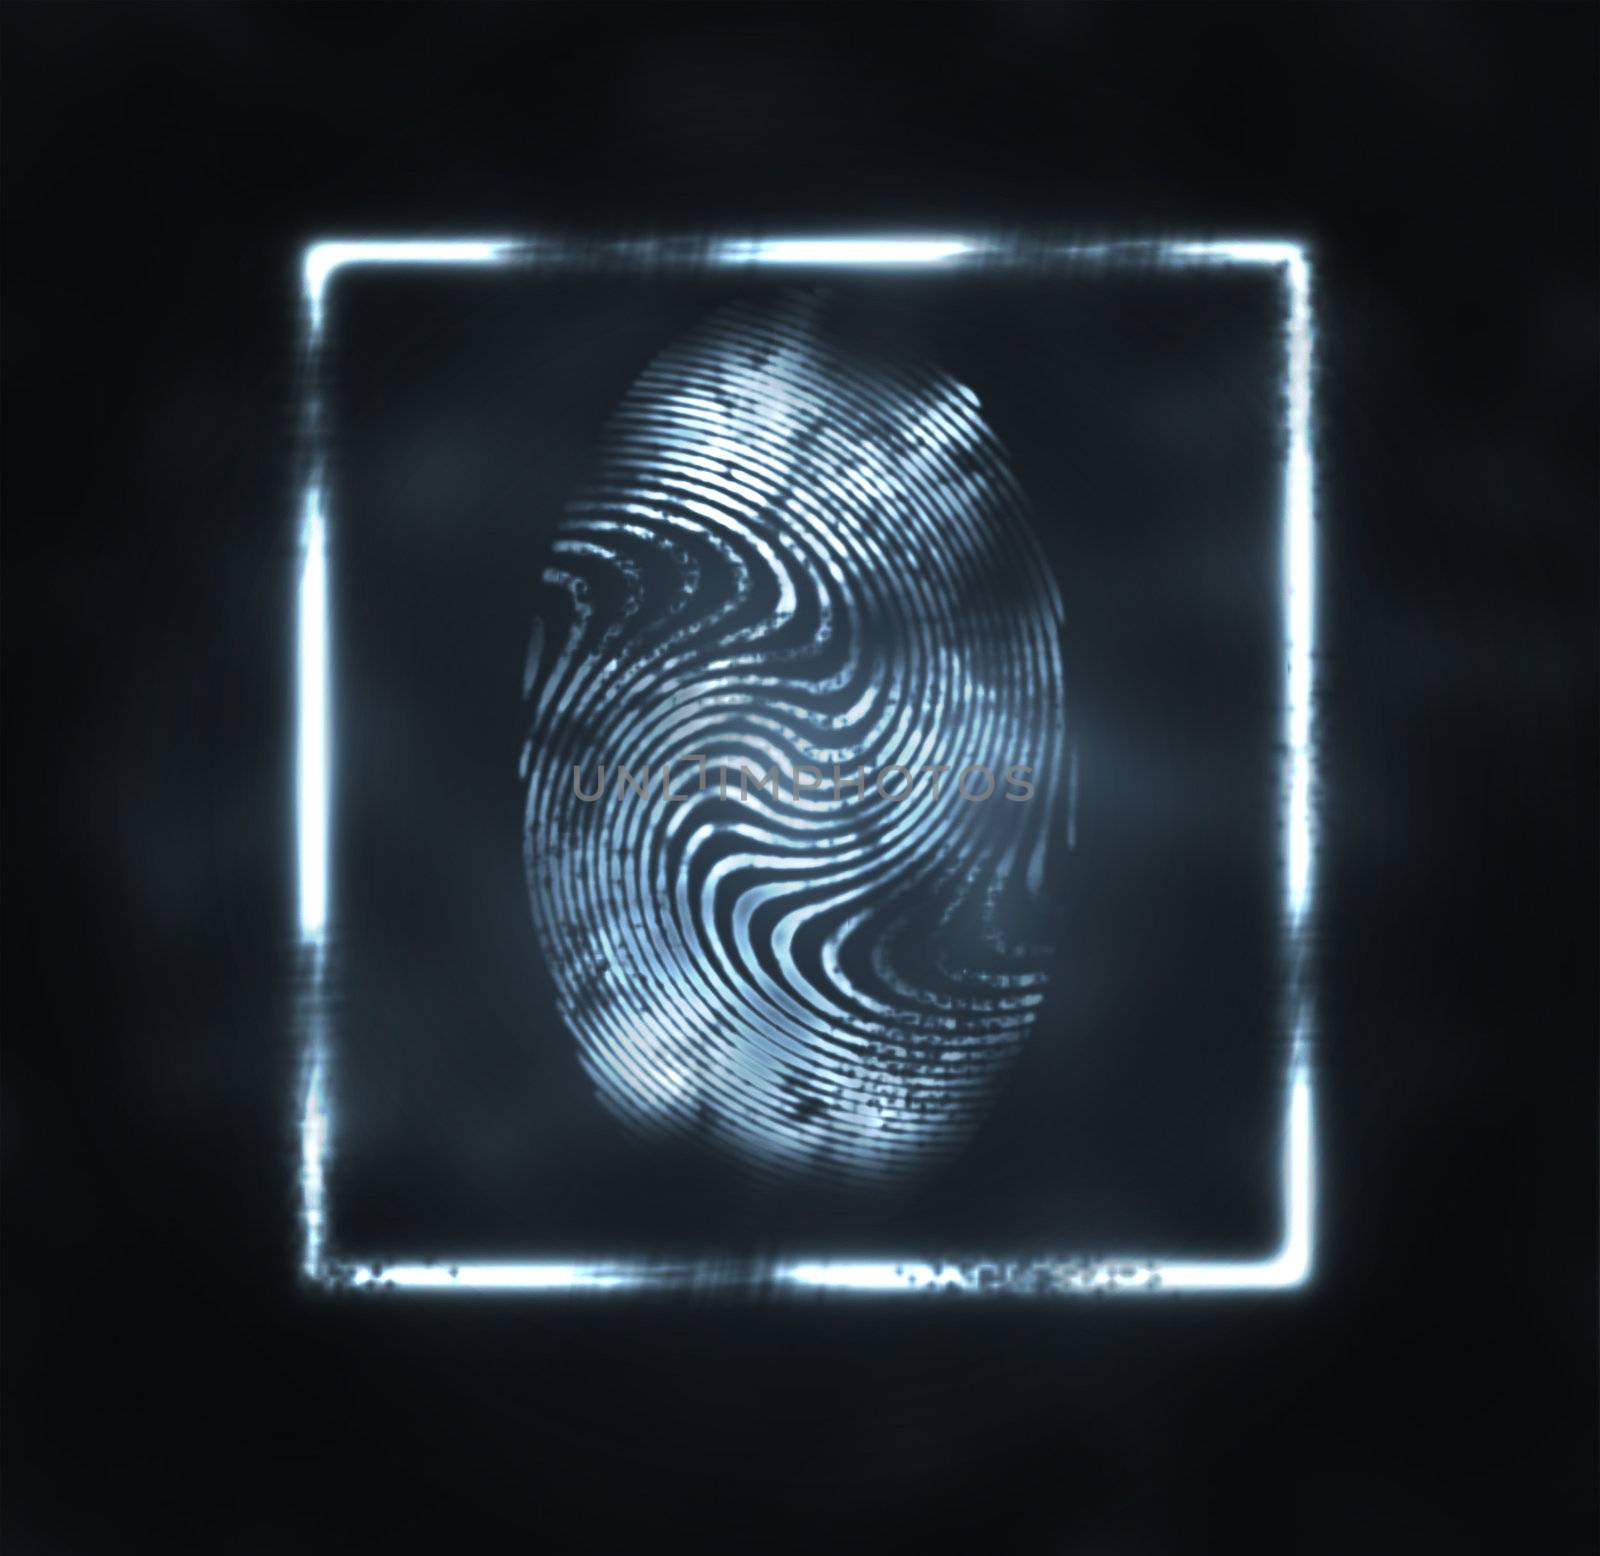 abstract illustration of the finger print in frame